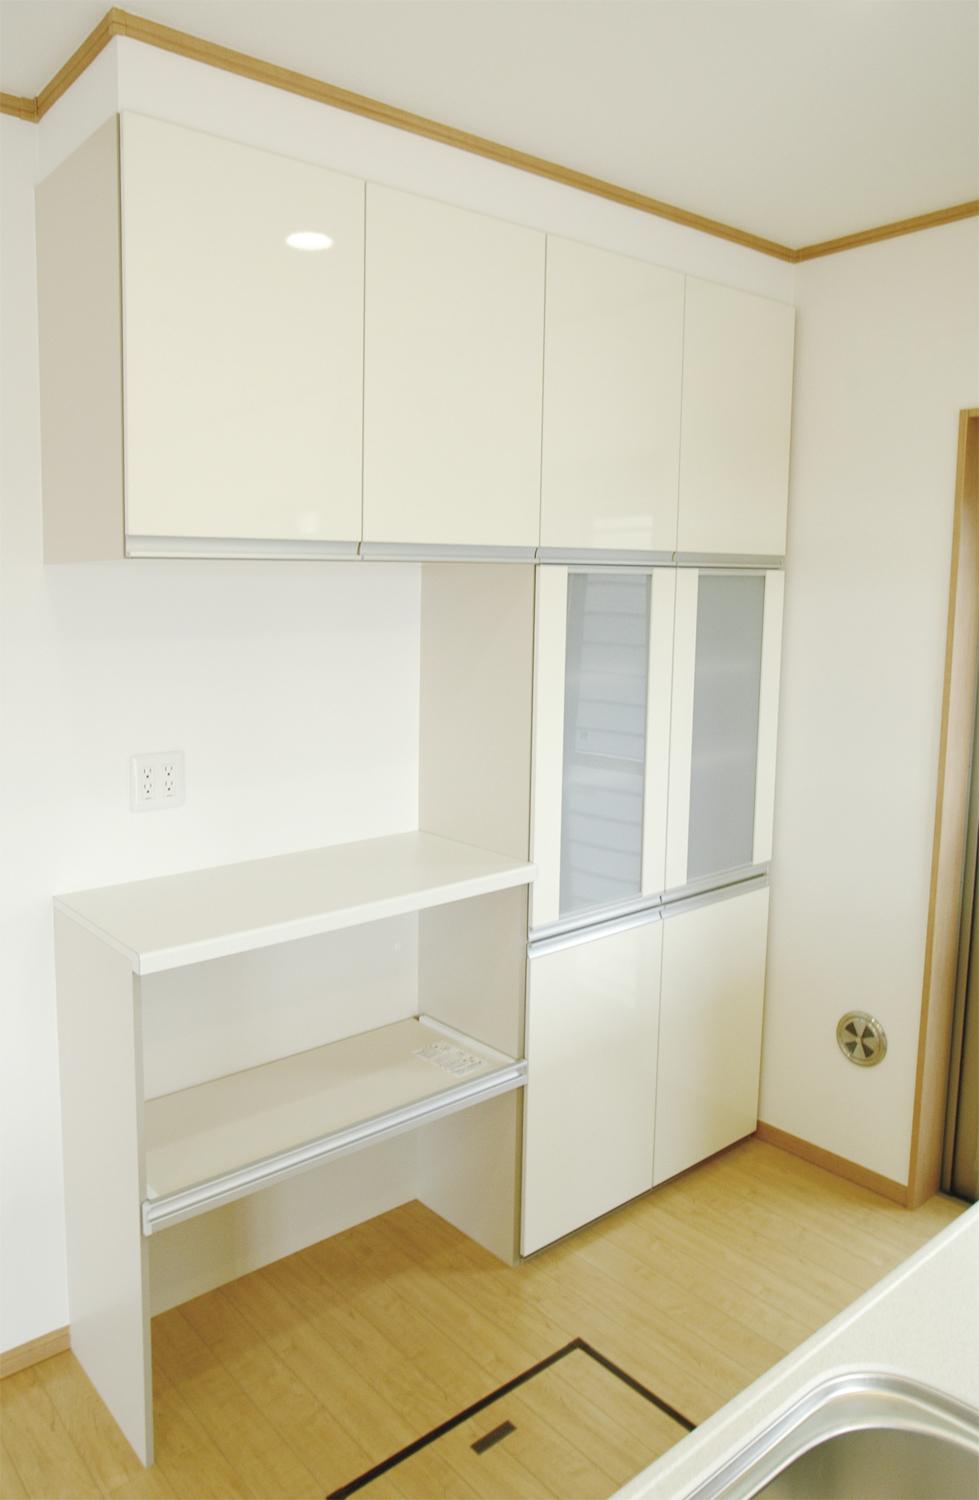 Same specifications photo (kitchen).  □  kitchen  □ (Model house) Tableware and stock food is plenty with Maeru cupboard.